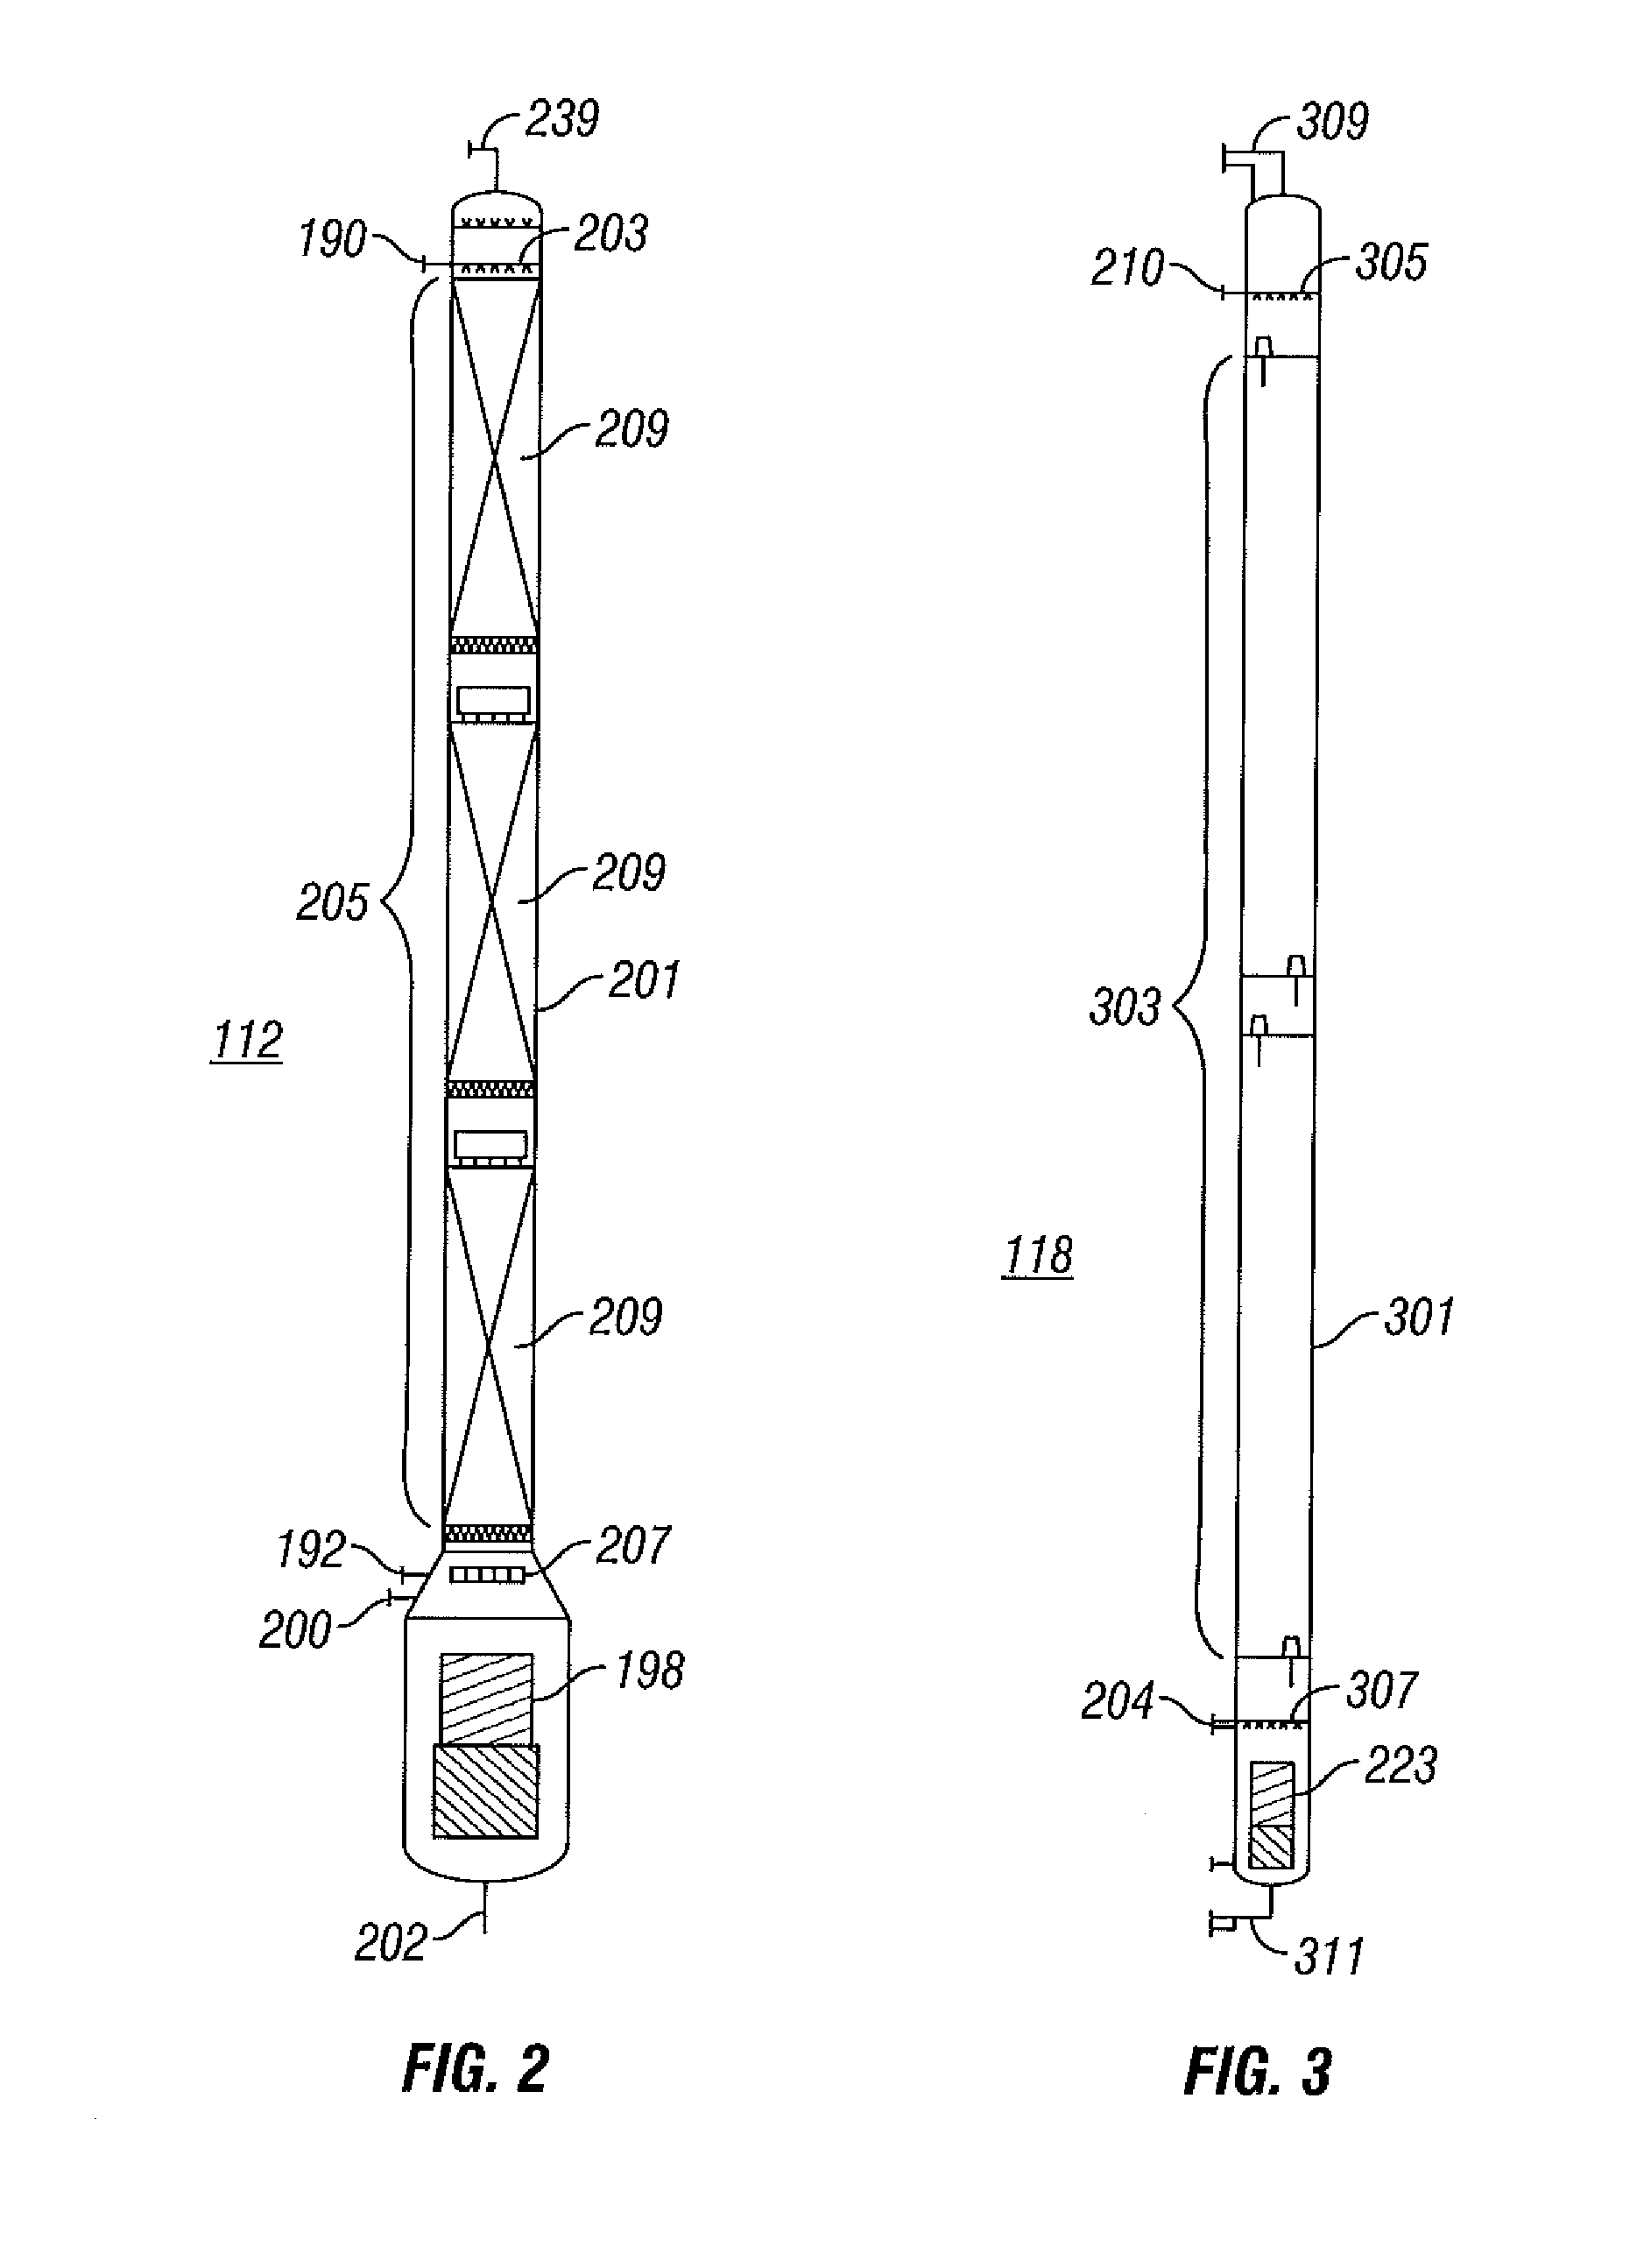 Systems and method for separating dimethyl ether from oil and water